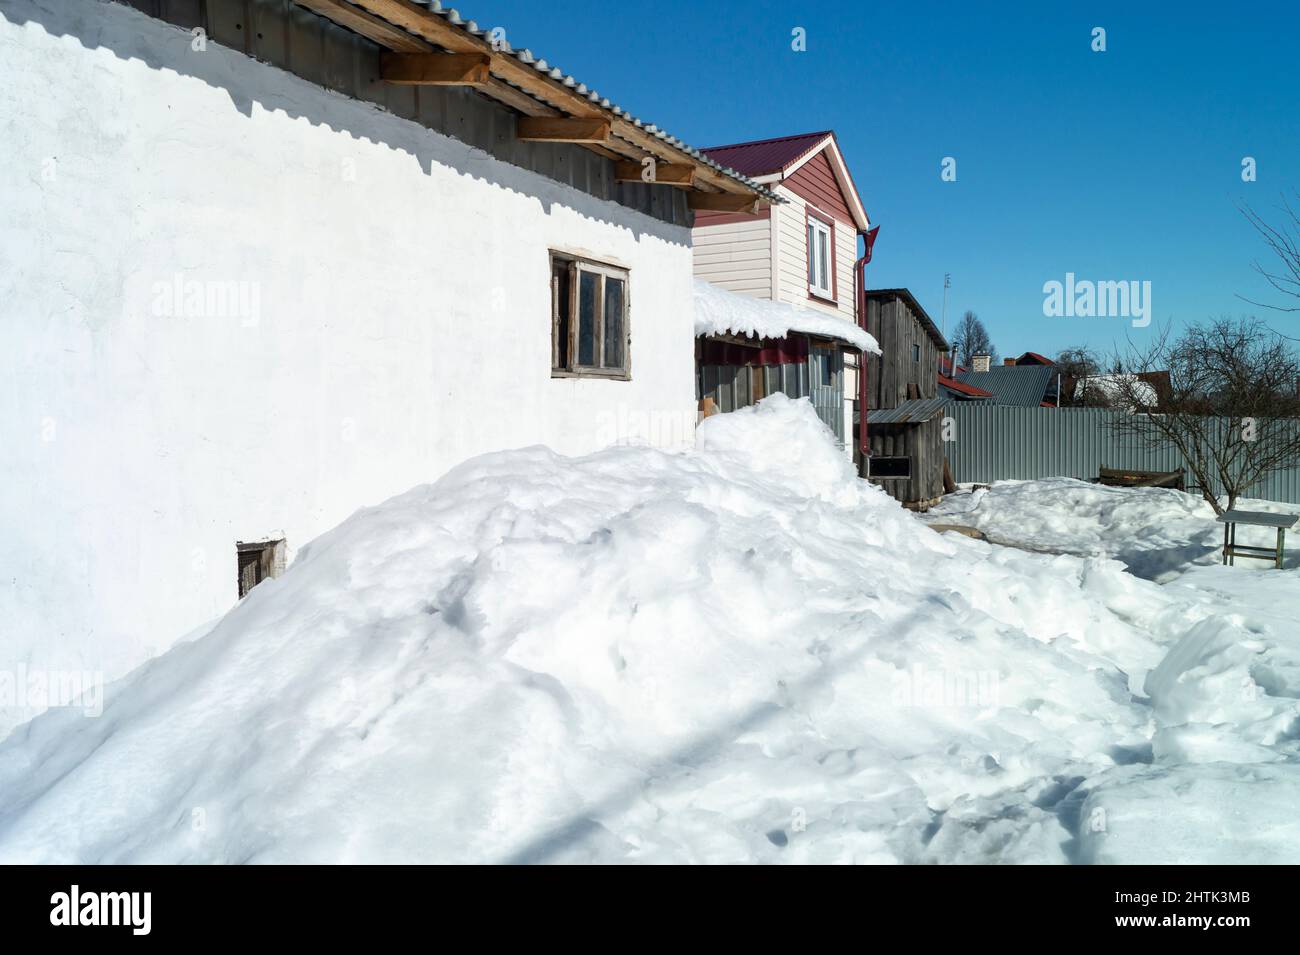 Snow drifts in the village outdoors. Landscape on a sunny day against a blue sky Stock Photo